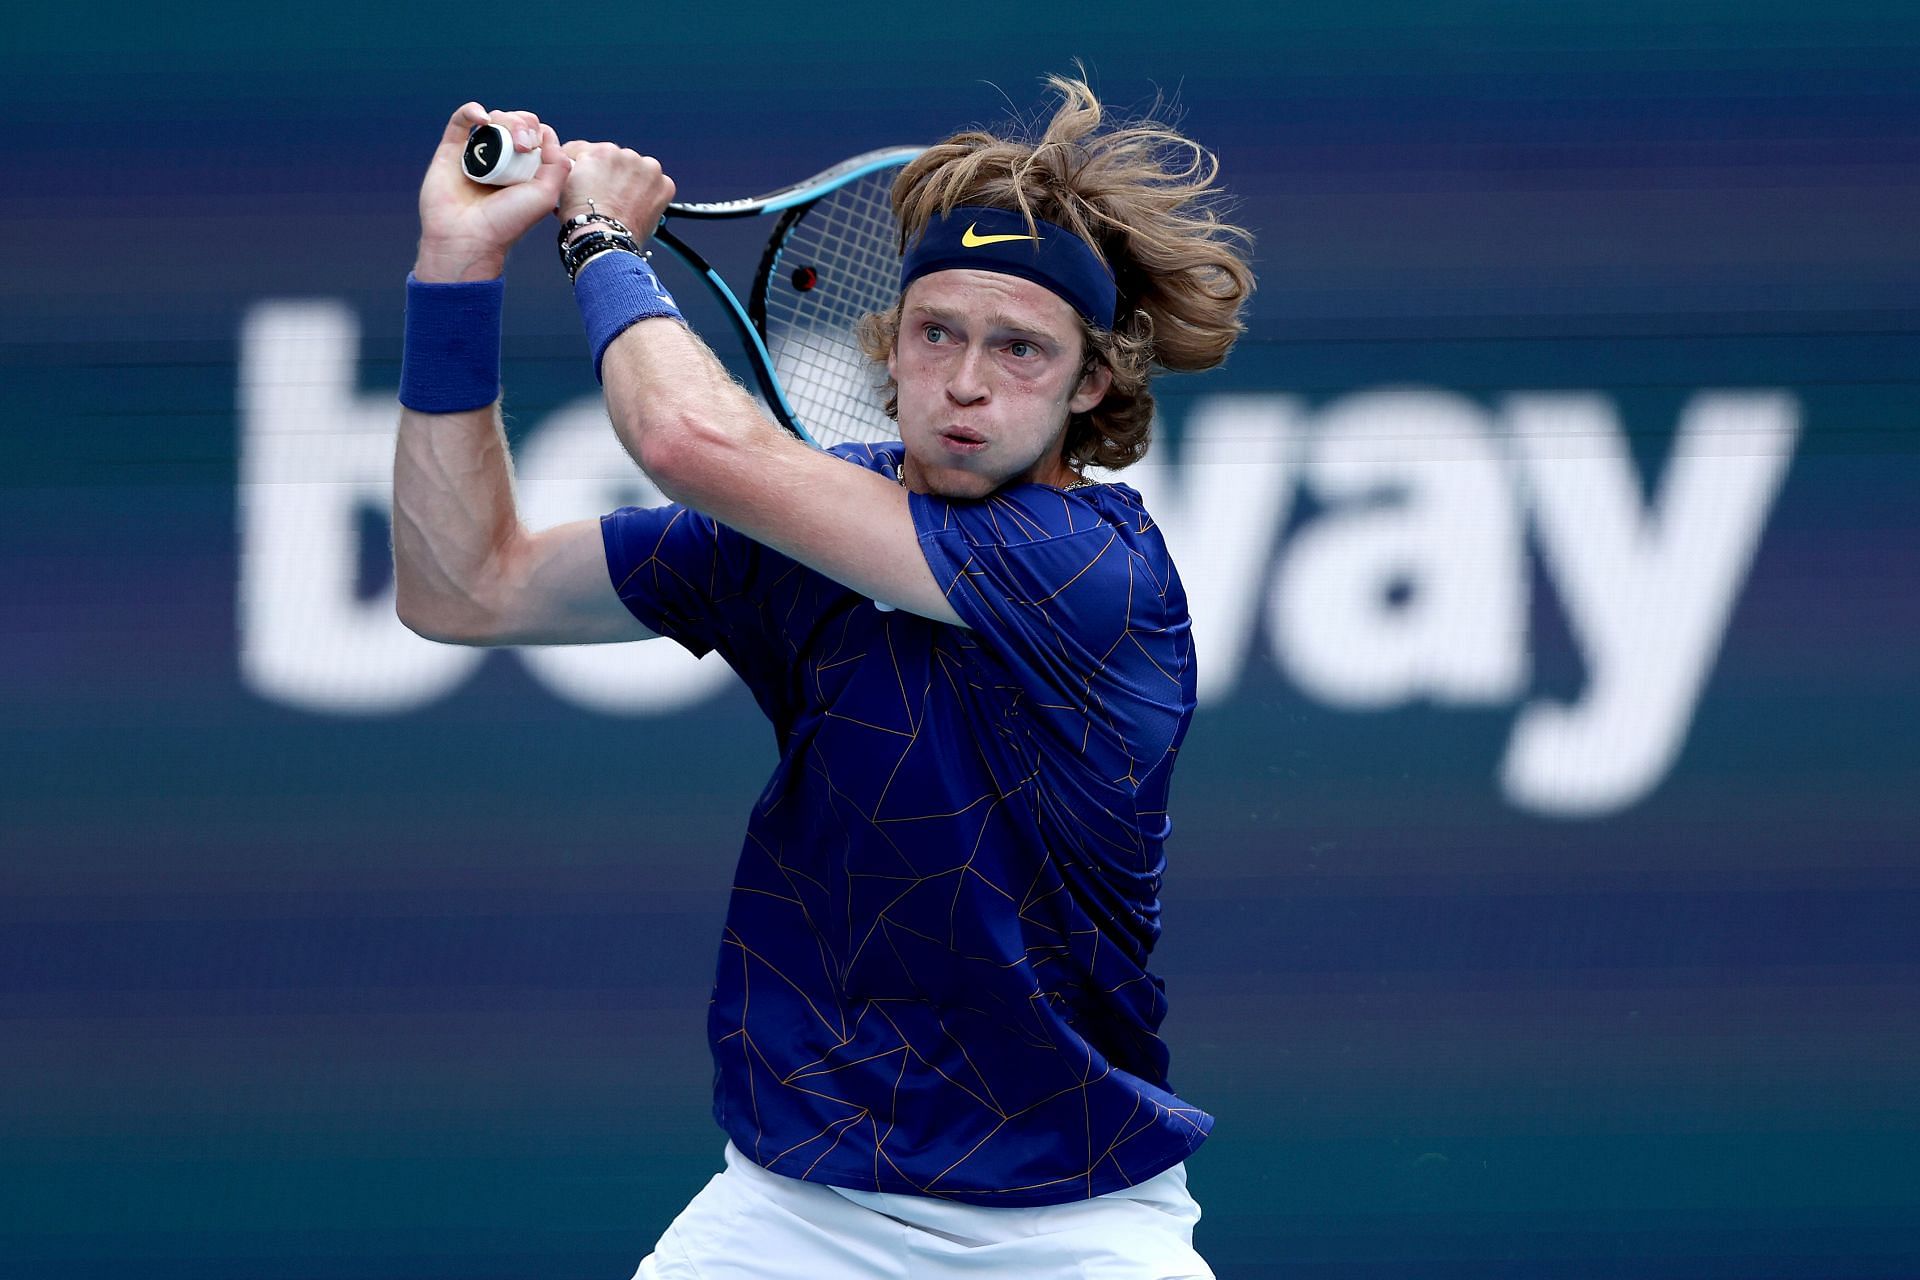 Andrey Rublev has been in good form this season